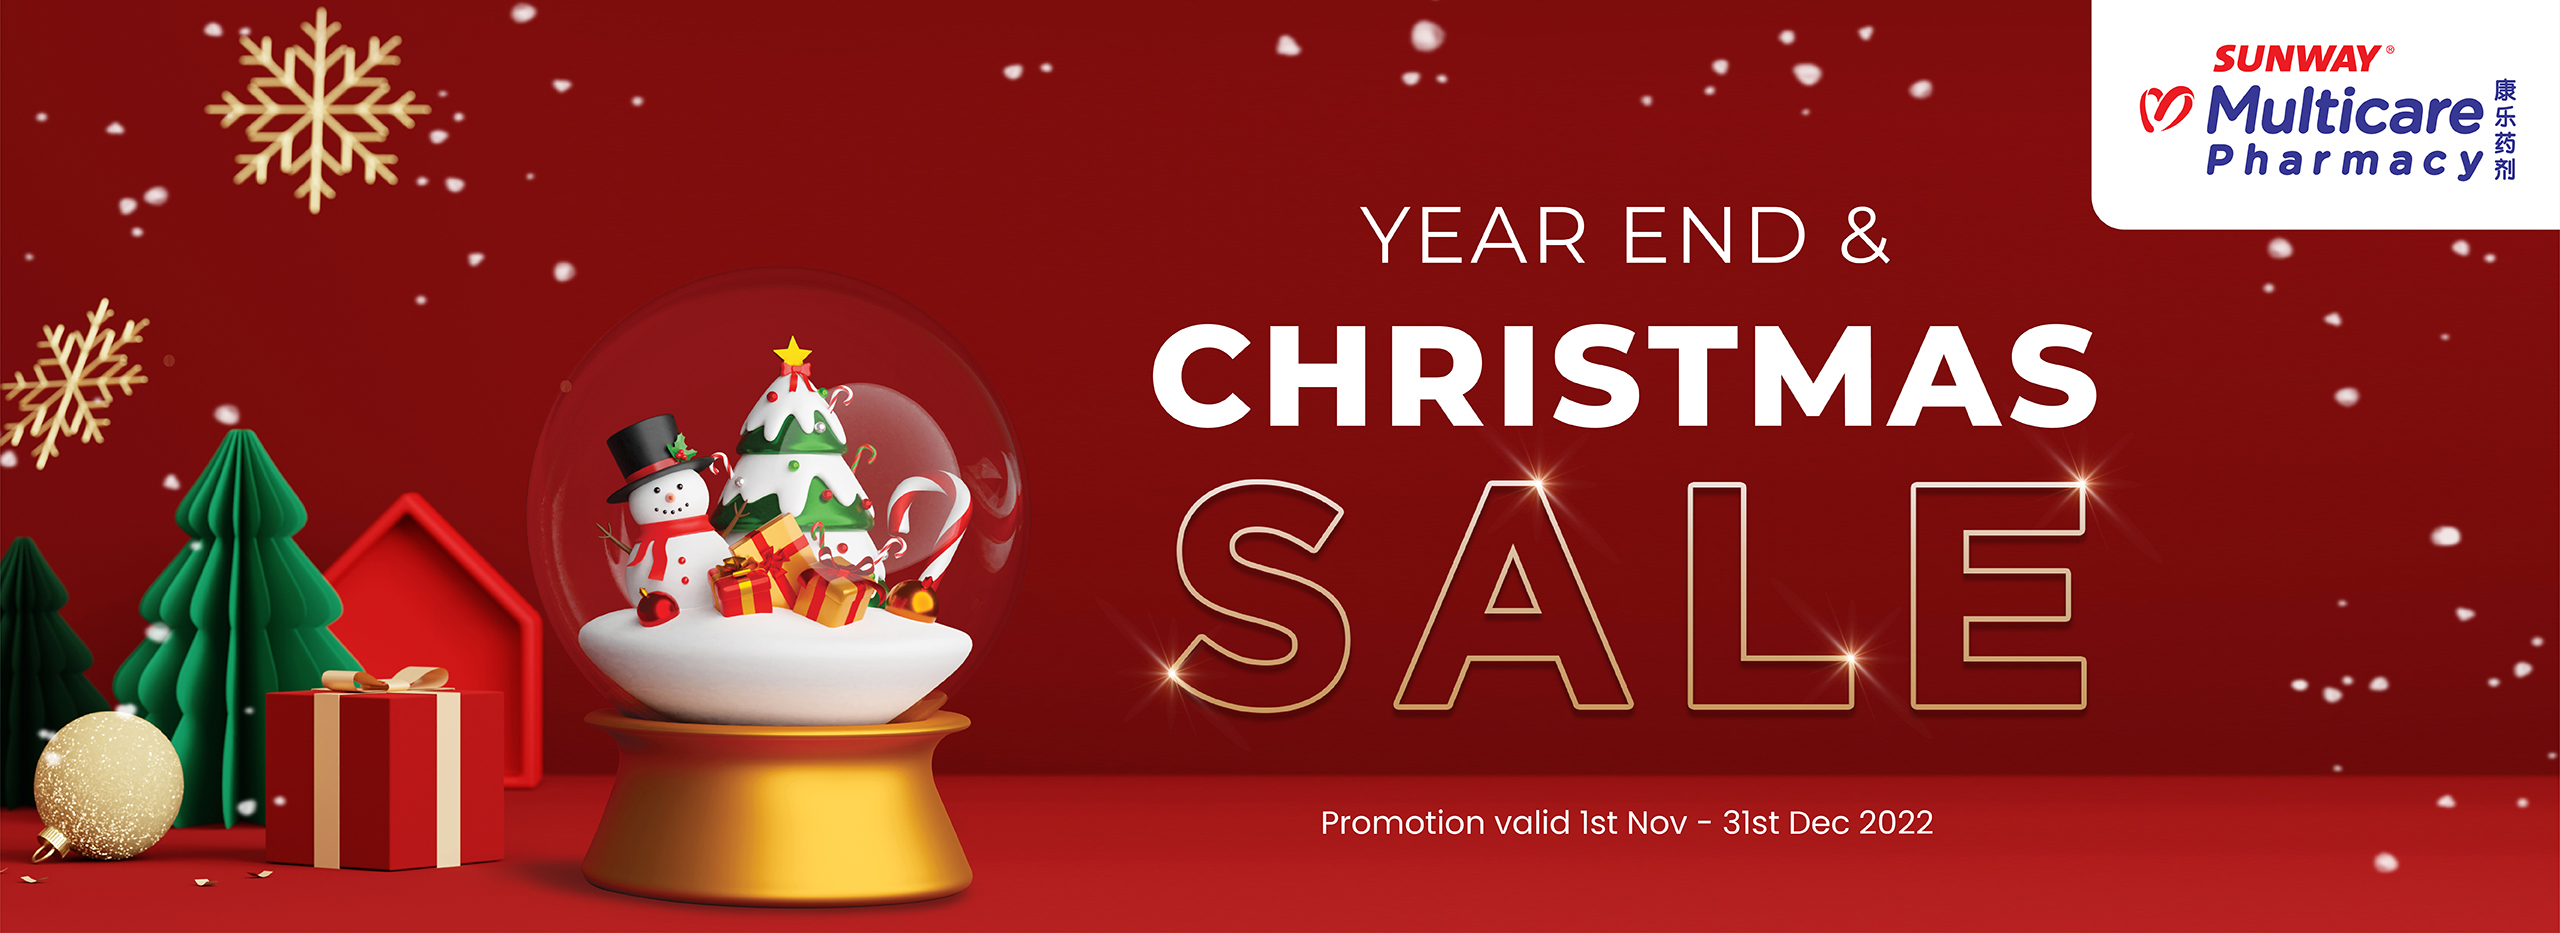 Year End & Christmas Sale